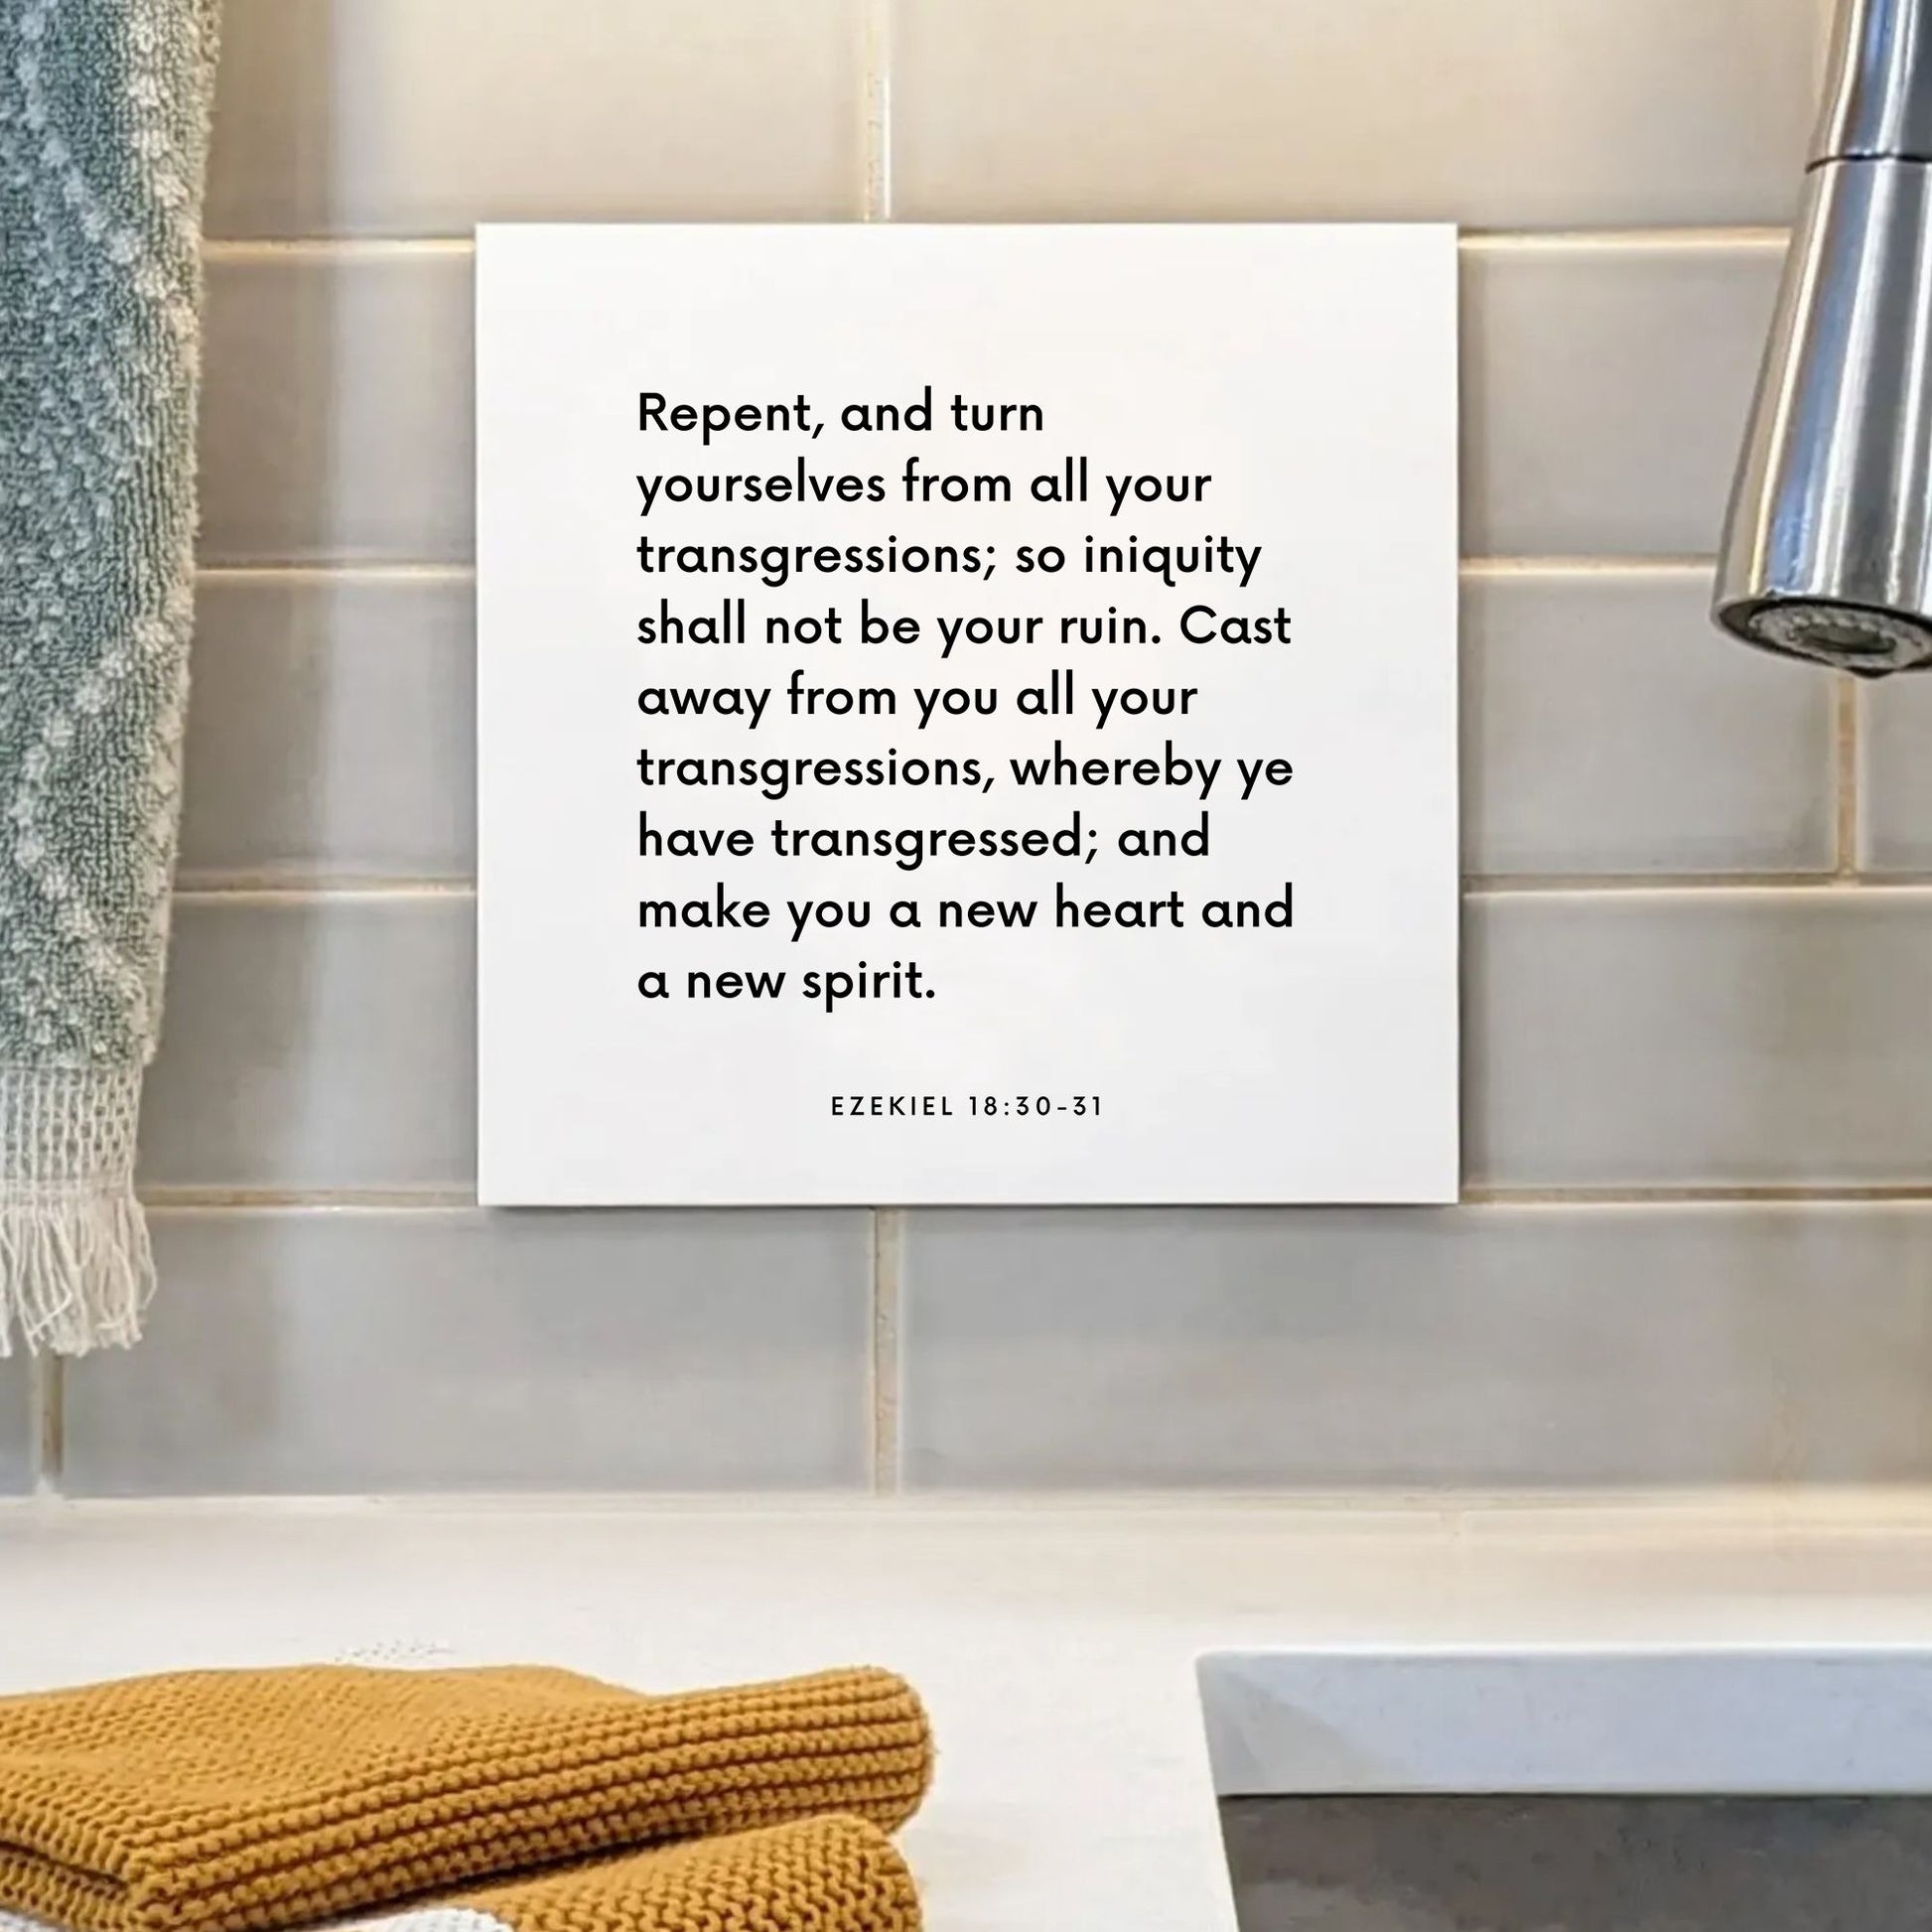 Sink mouting of the scripture tile for Ezekiel 18:30-31 - "Make you a new heart and a new spirit"